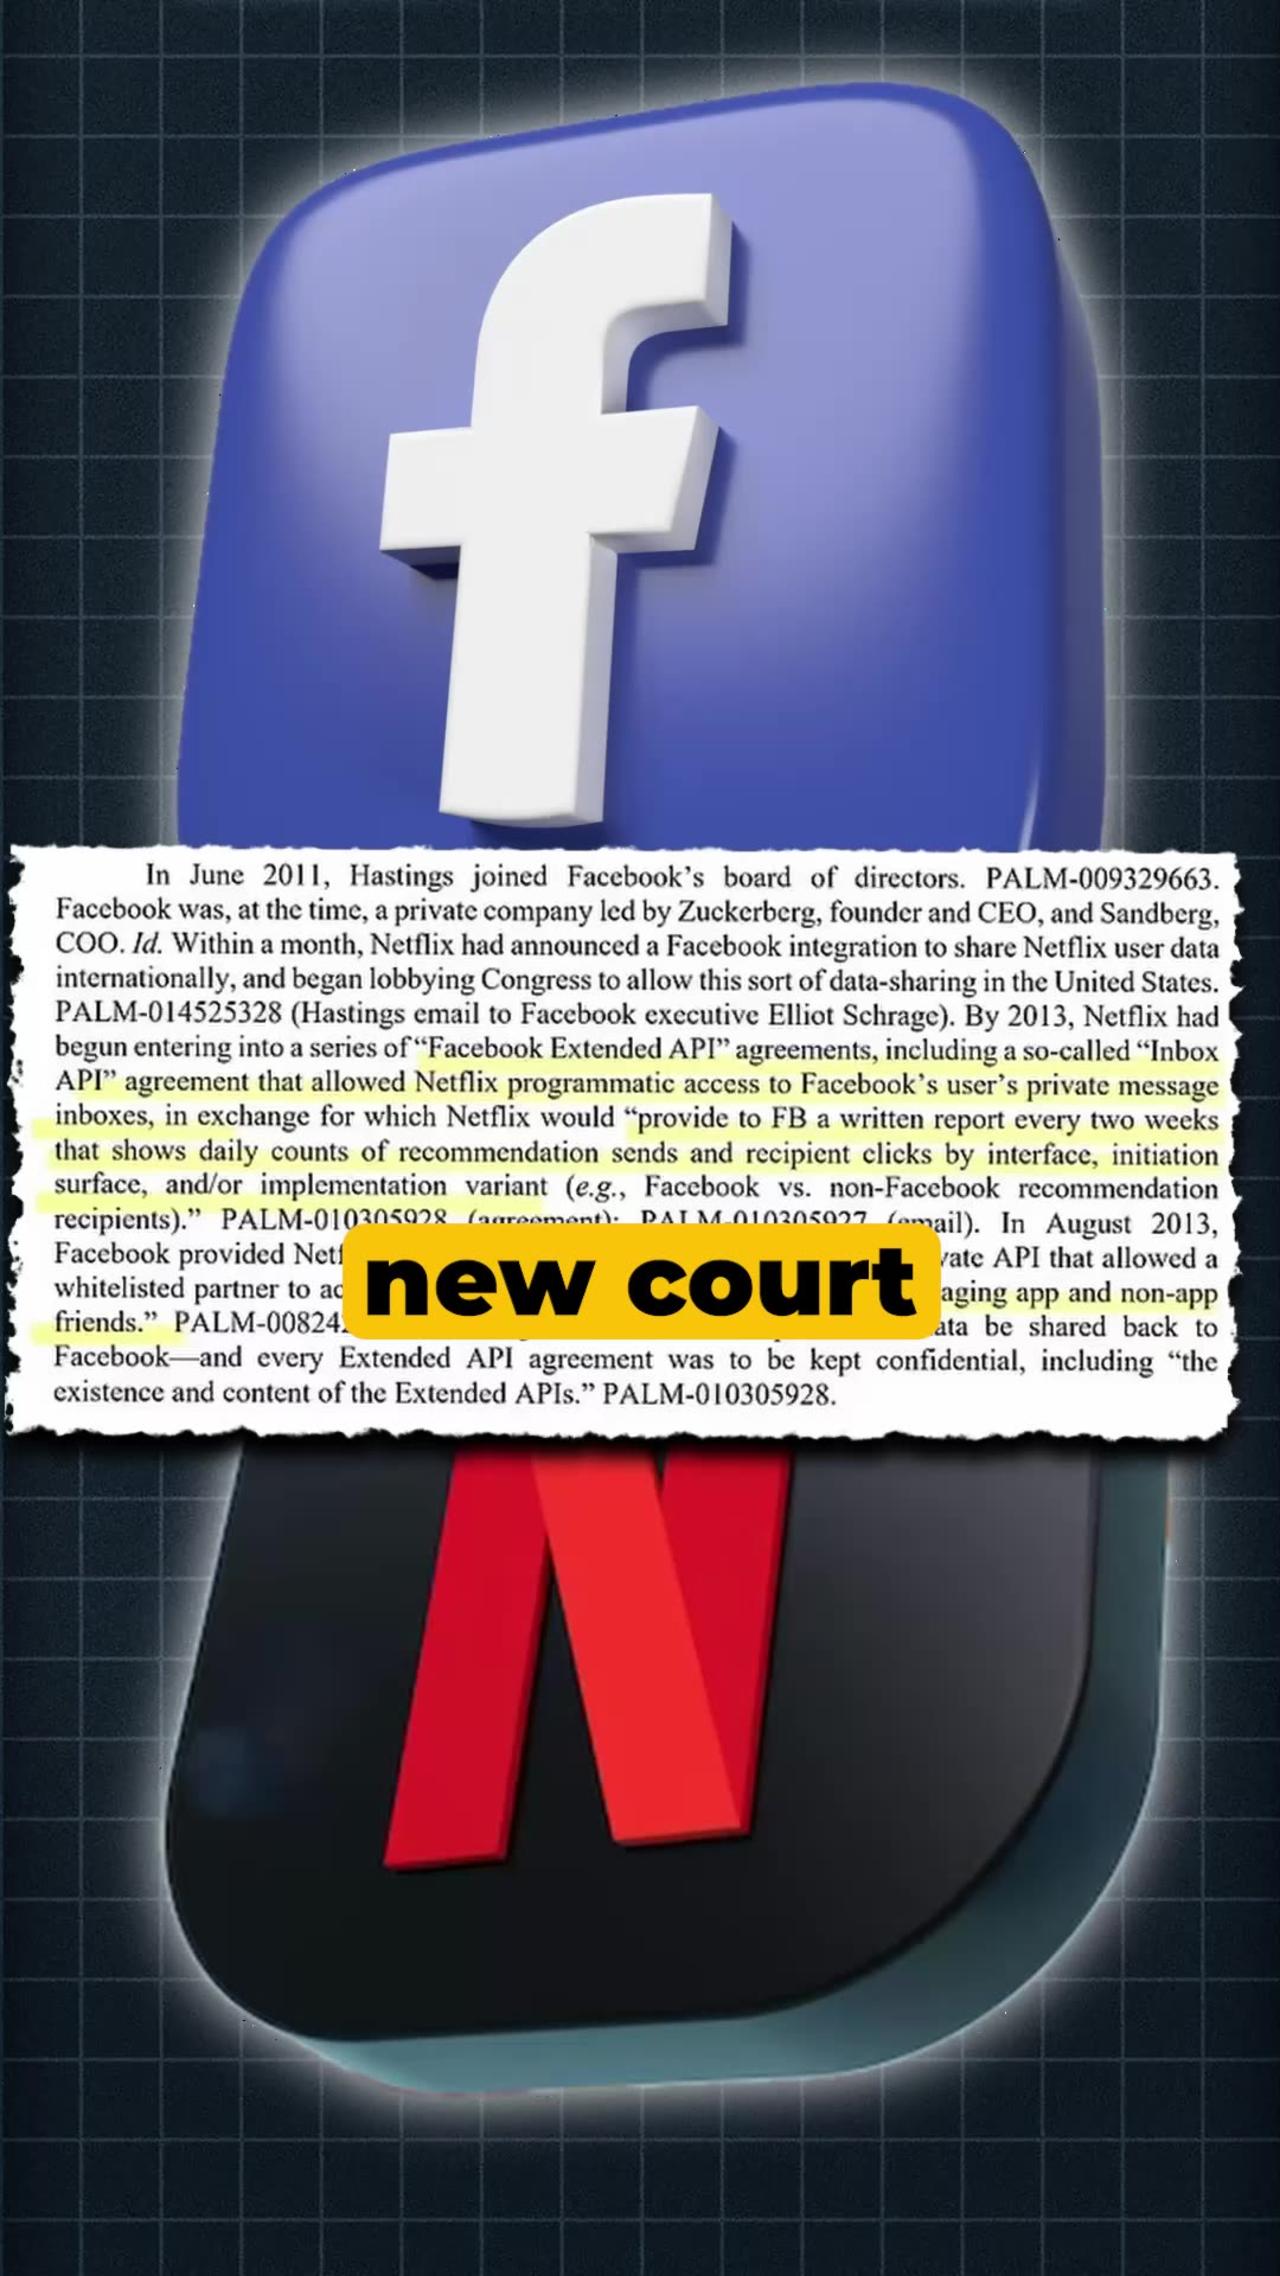 Facebook exposes DMs to Netflix #Privacy #Spying #BigTech